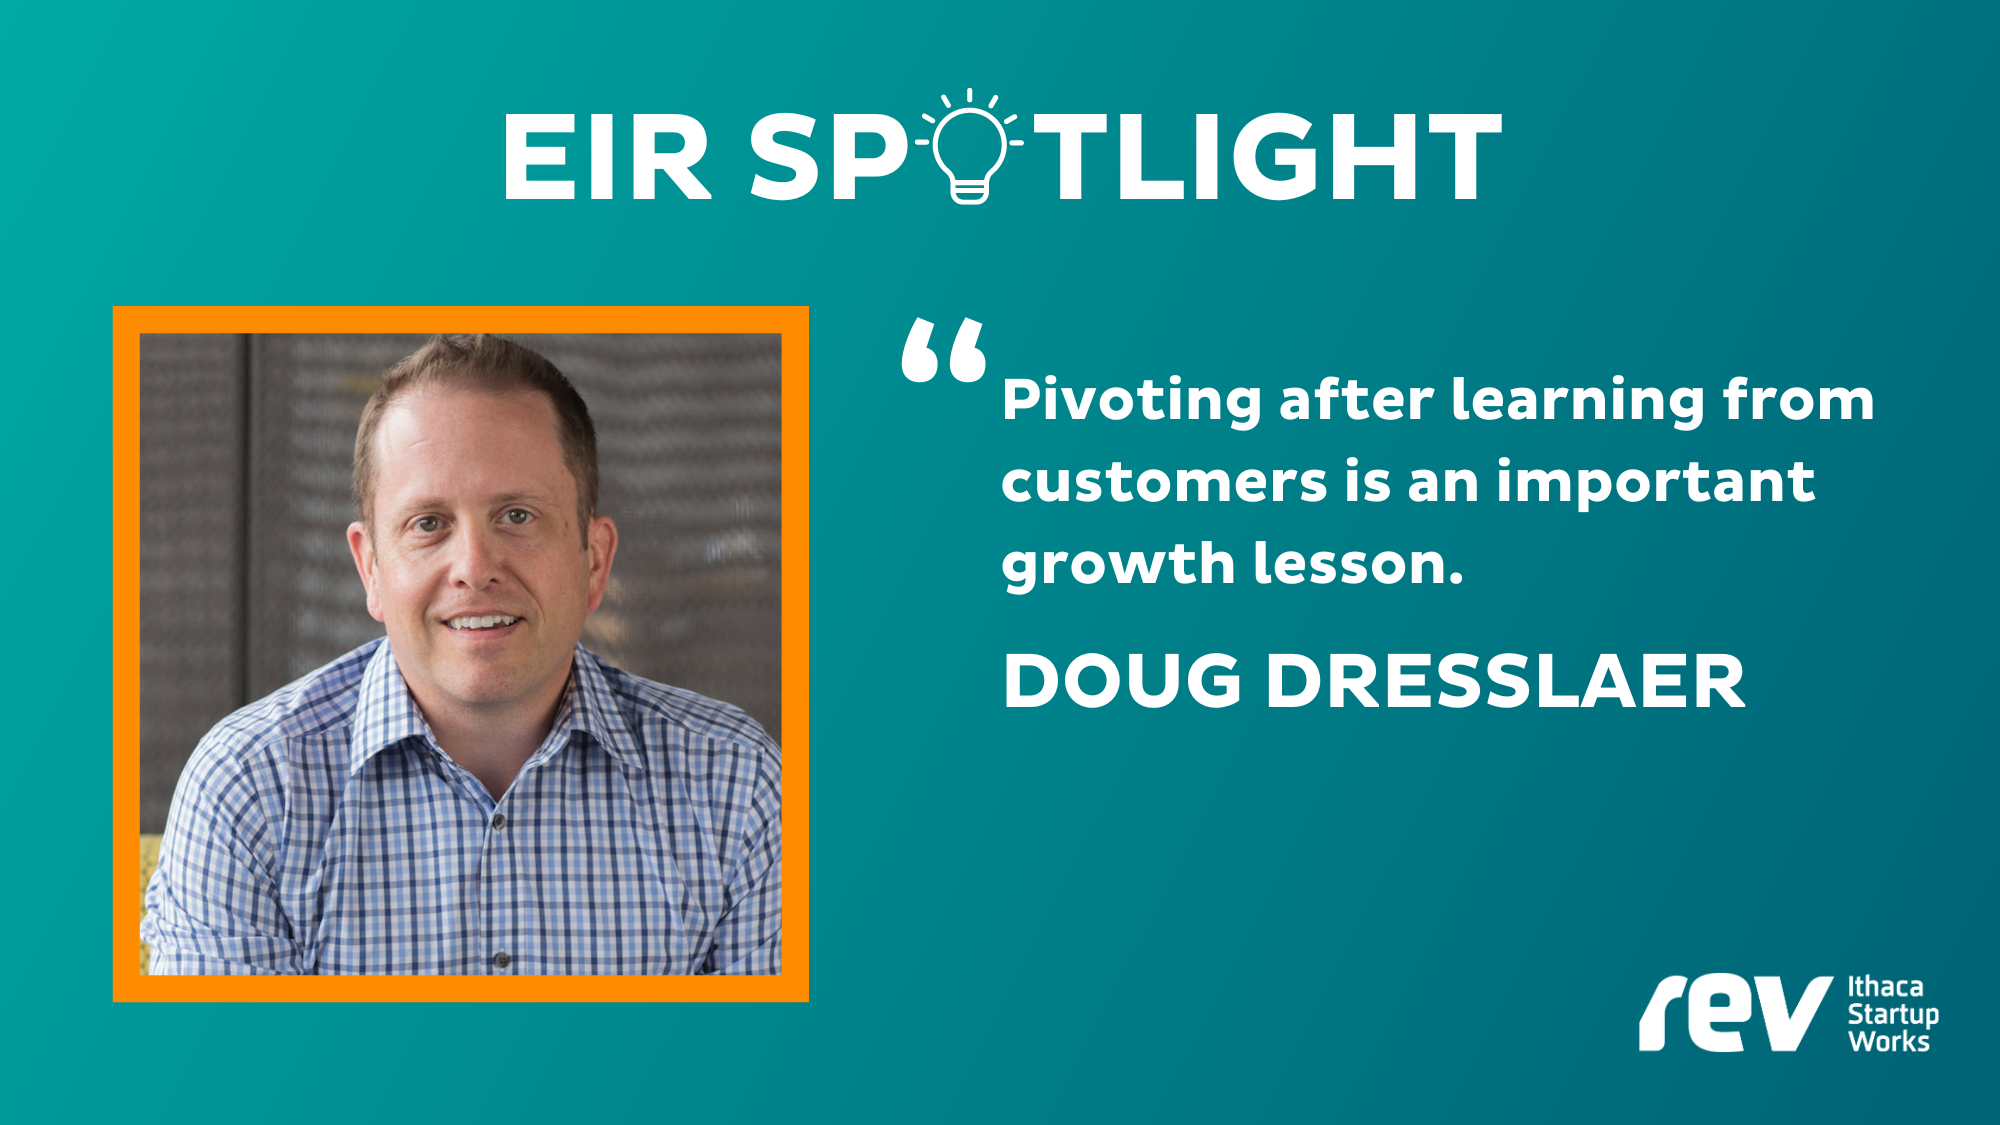 Headshot of Doug Dresslaer, a white man smiling in a plaid button-down shirt, against a teal background with text EIR Spotlight and quote, "Pivoting after learning from customers is an important growth lesson". Rev Ithaca Startup Works logo in the bottom right corner.